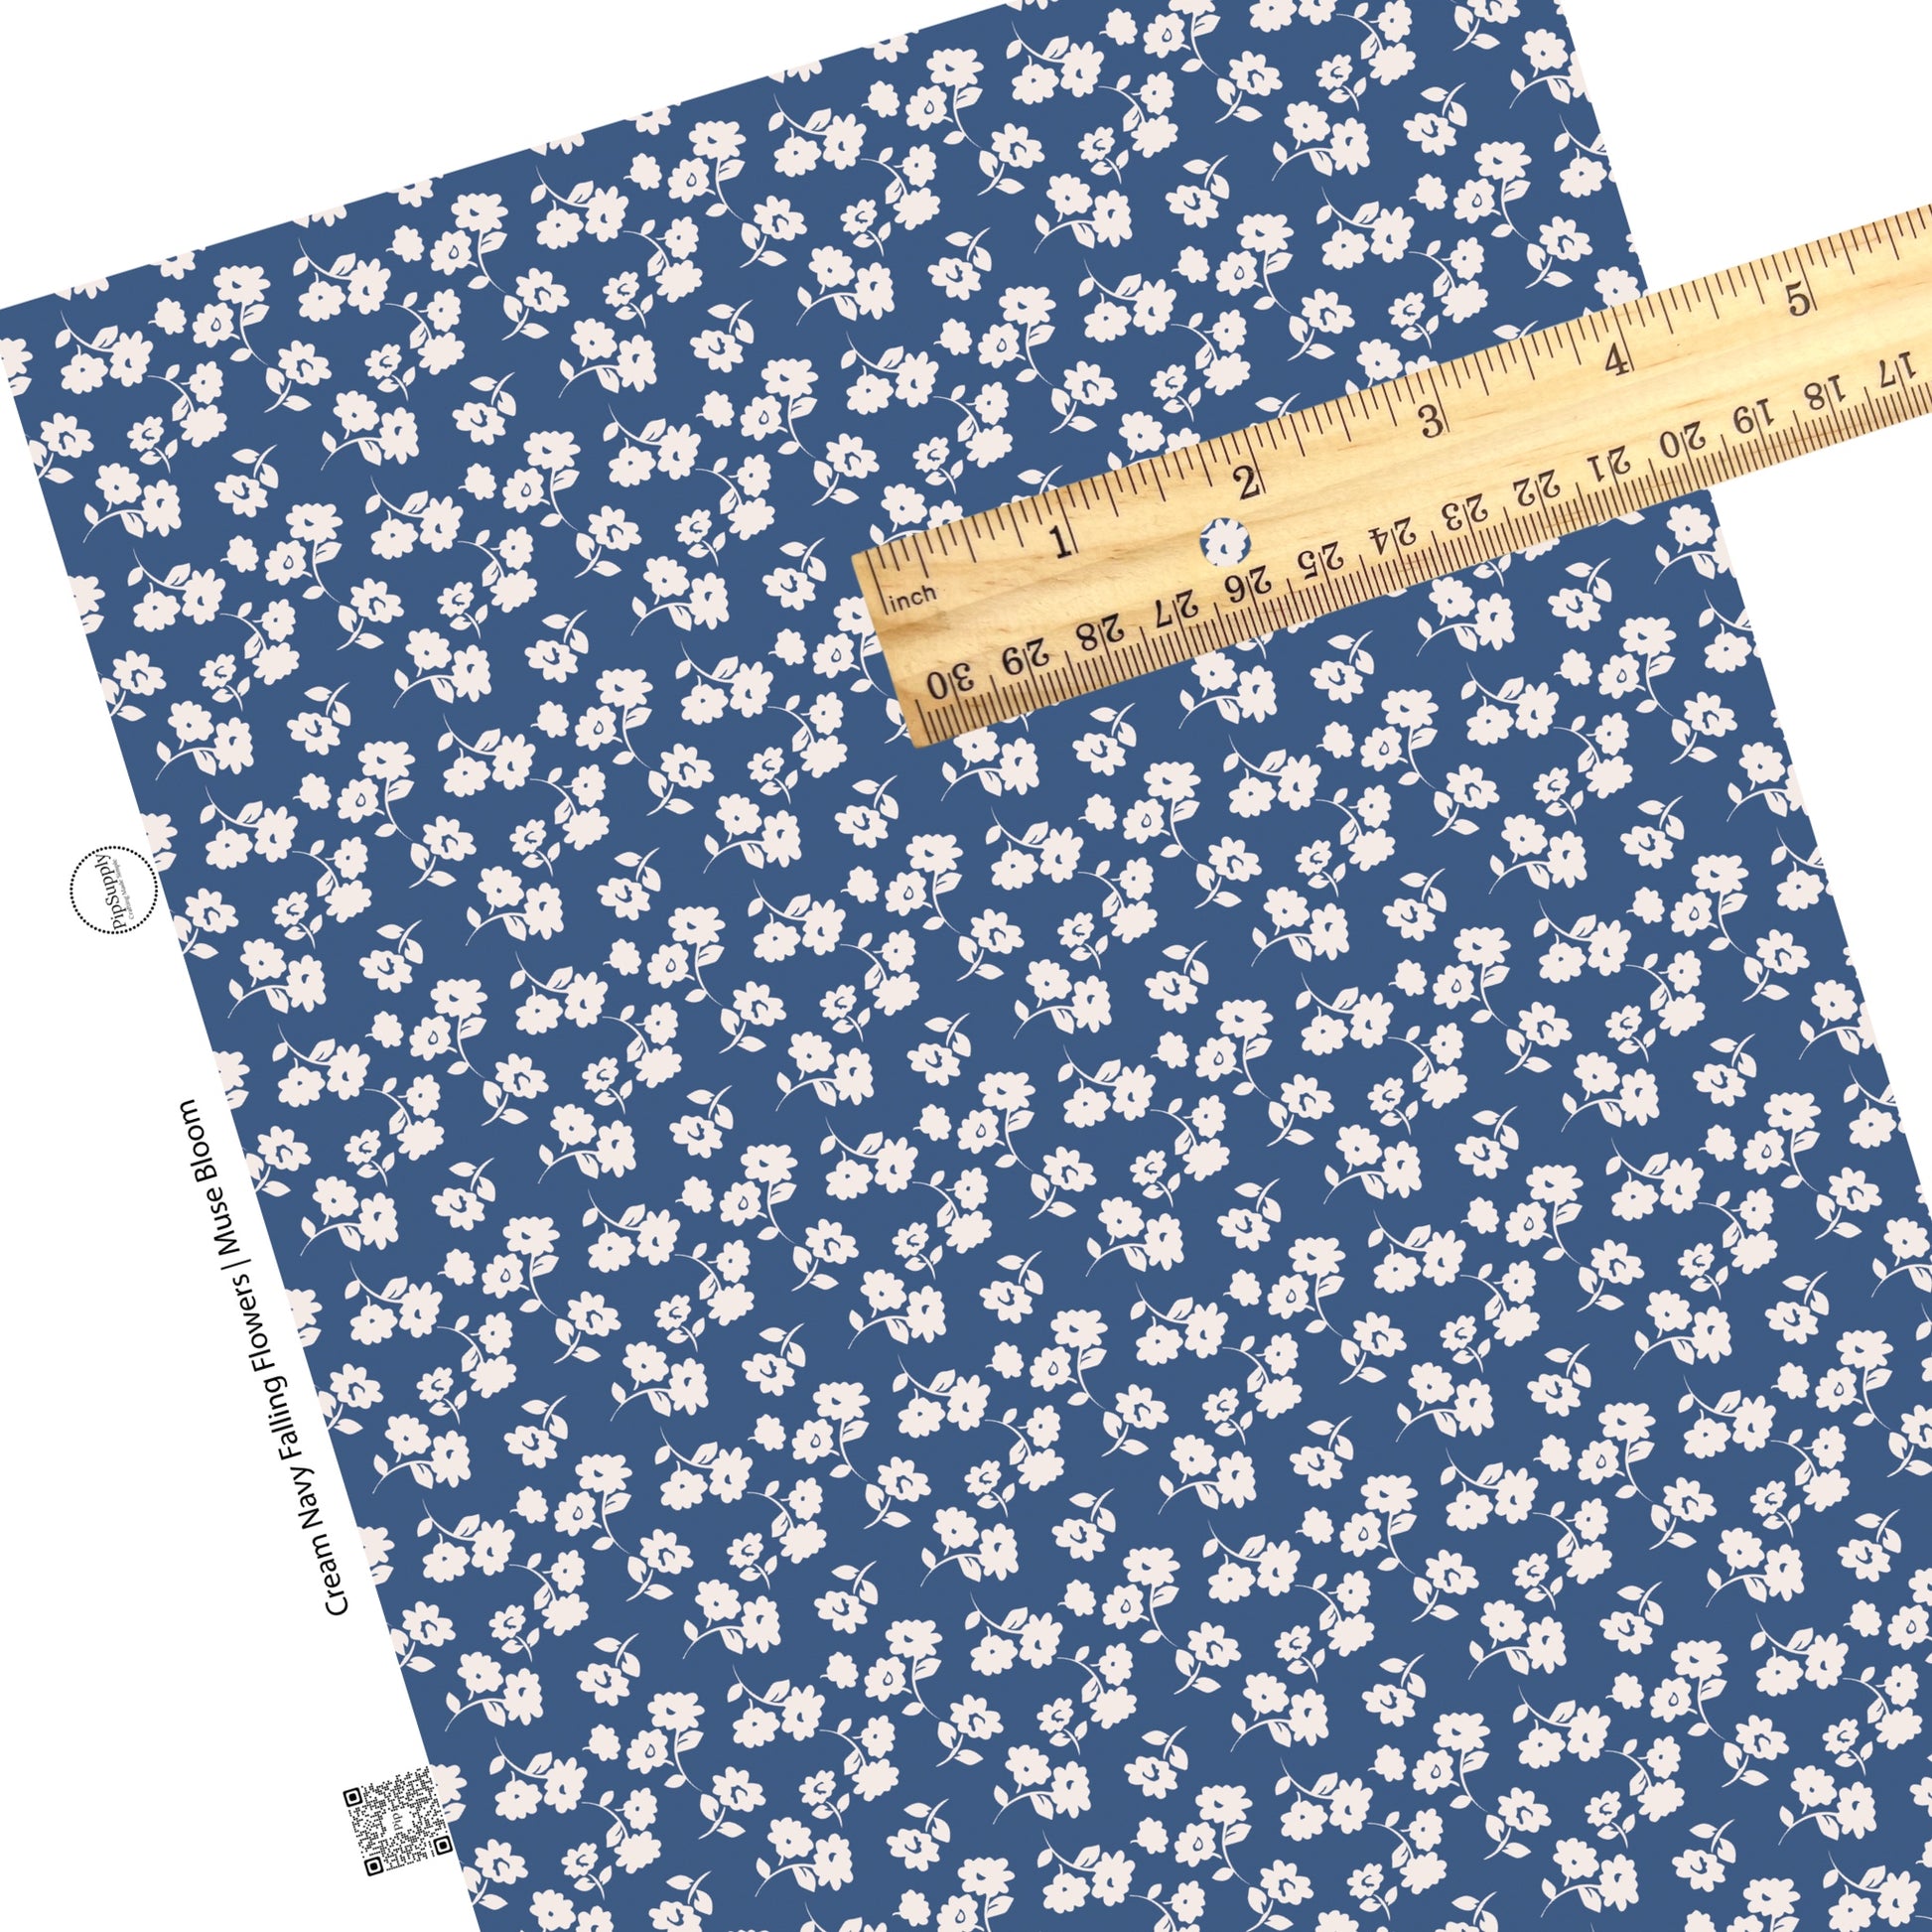 These floral themed dark blue faux leather sheets contain the following design elements: light cream flowers on navy blue.